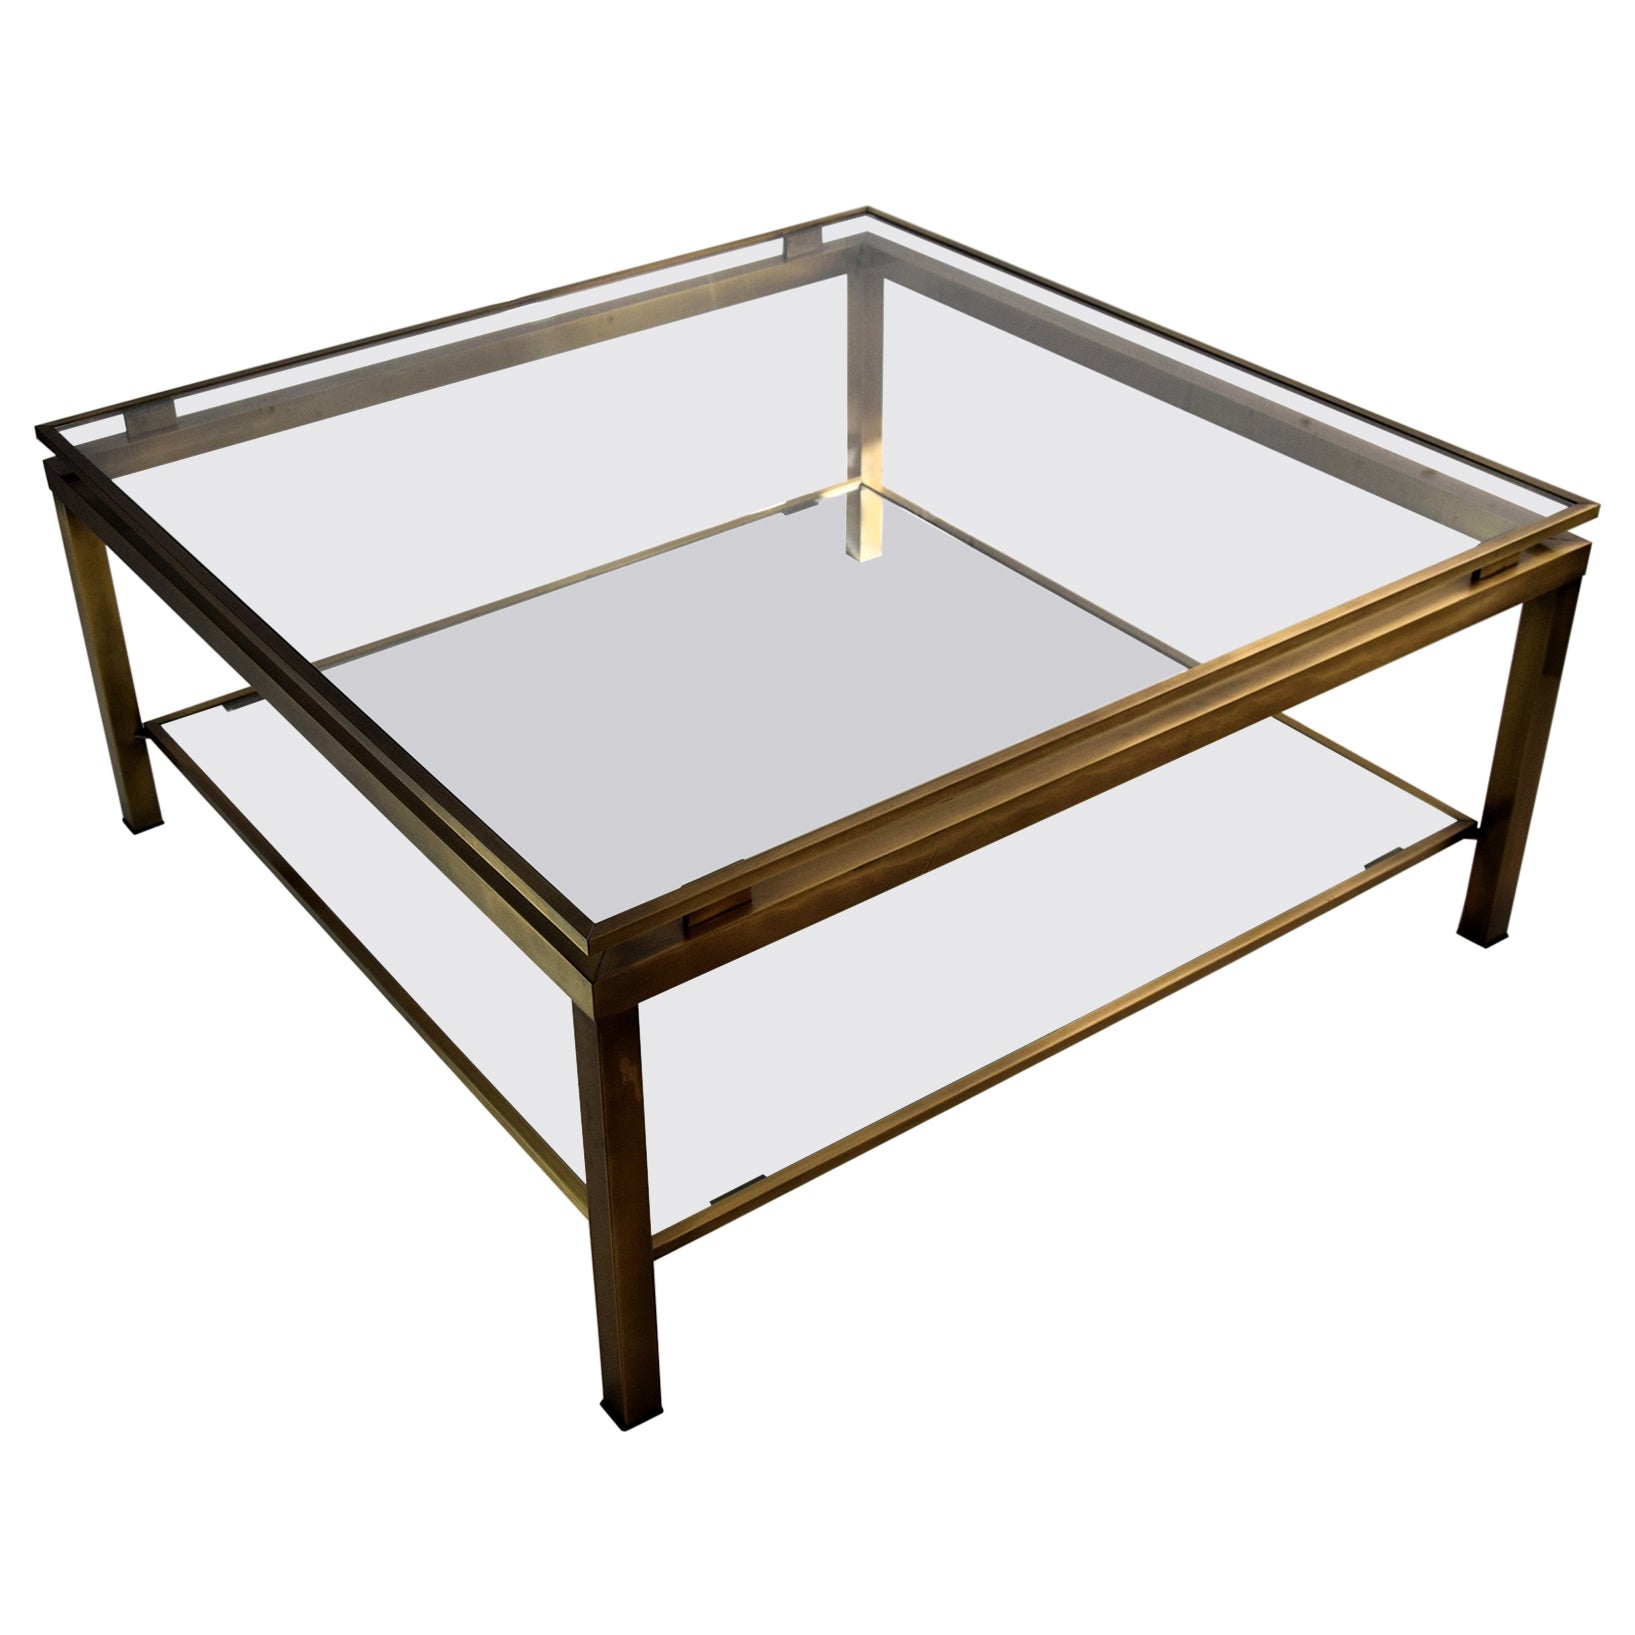 Maison Jansen Mid-Century Modern Brass and Glass Two-Tier Coffee Table